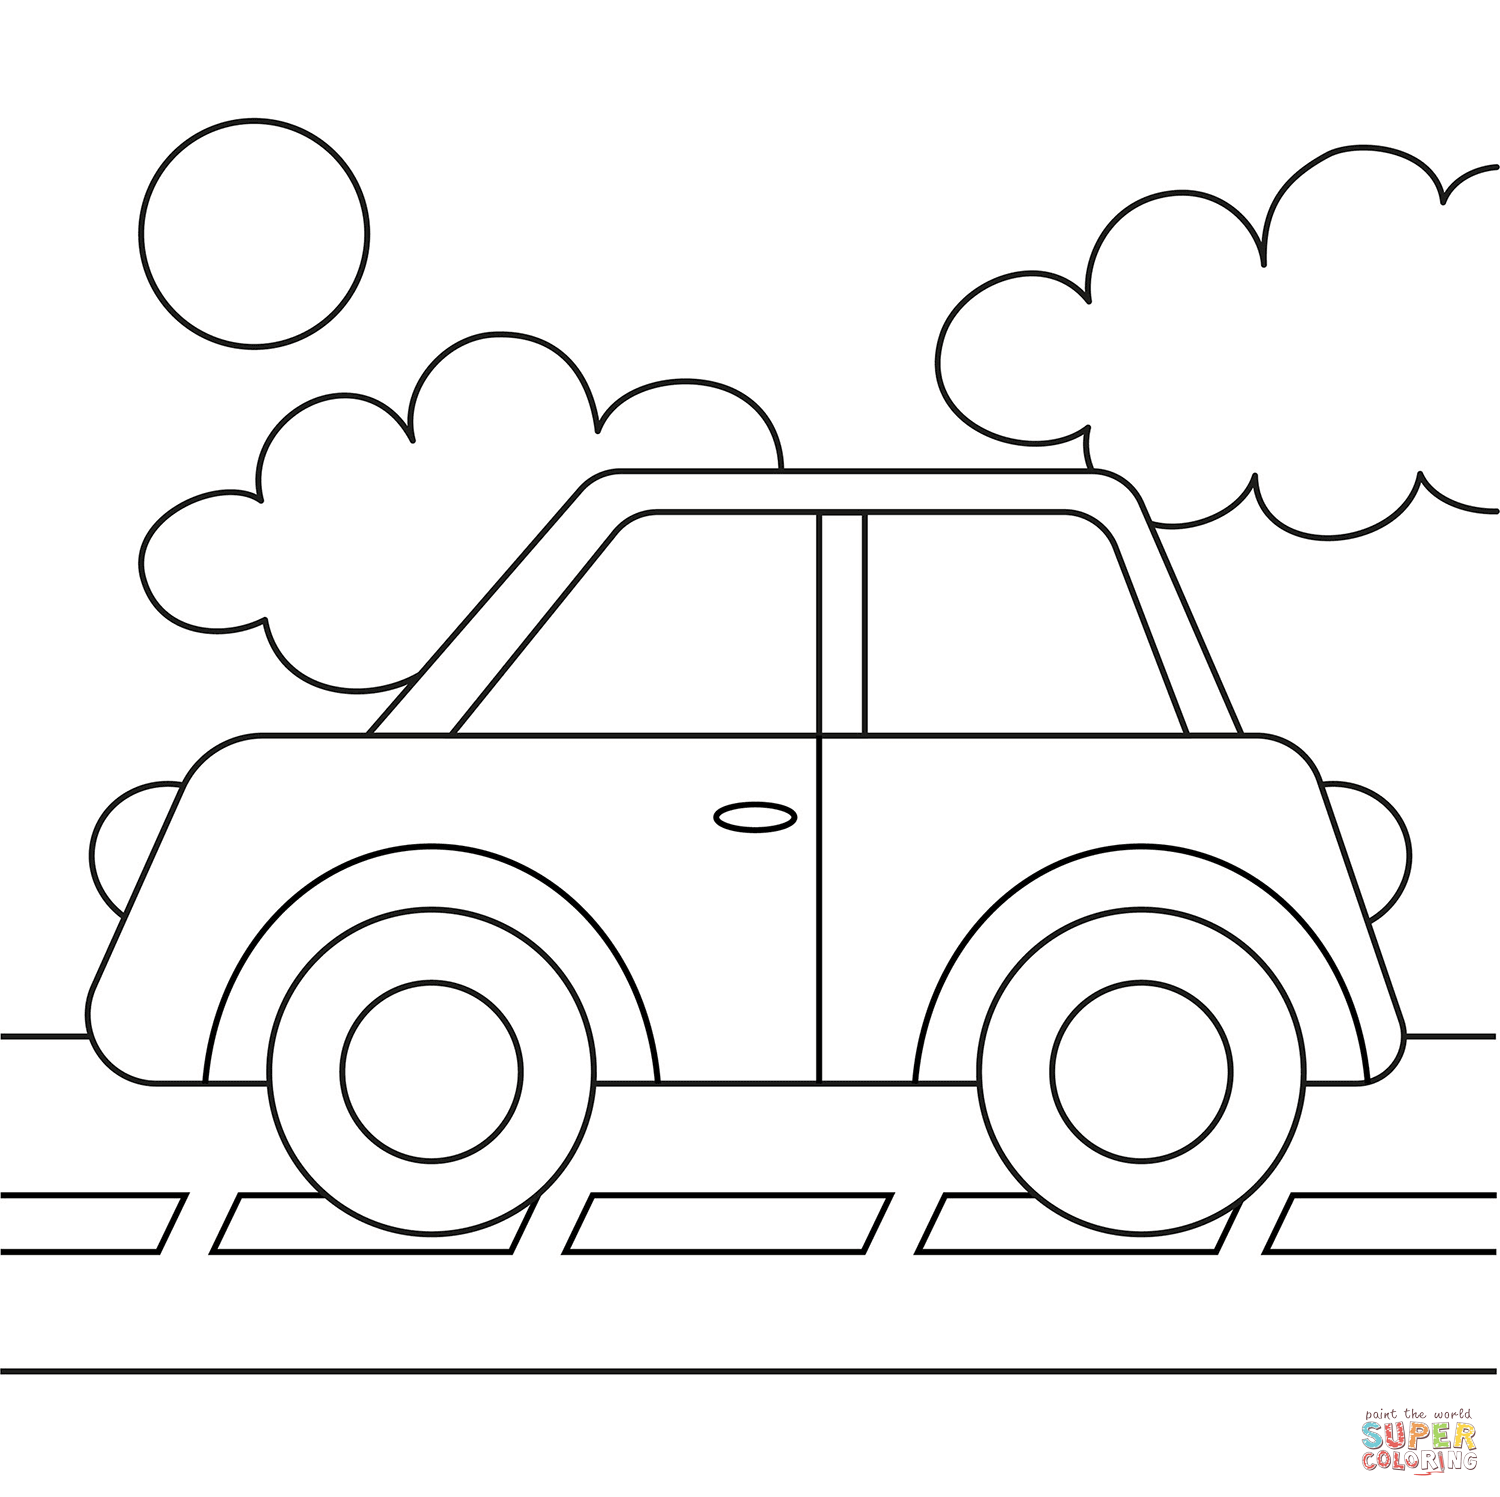 Simple car coloring page free printable coloring pages